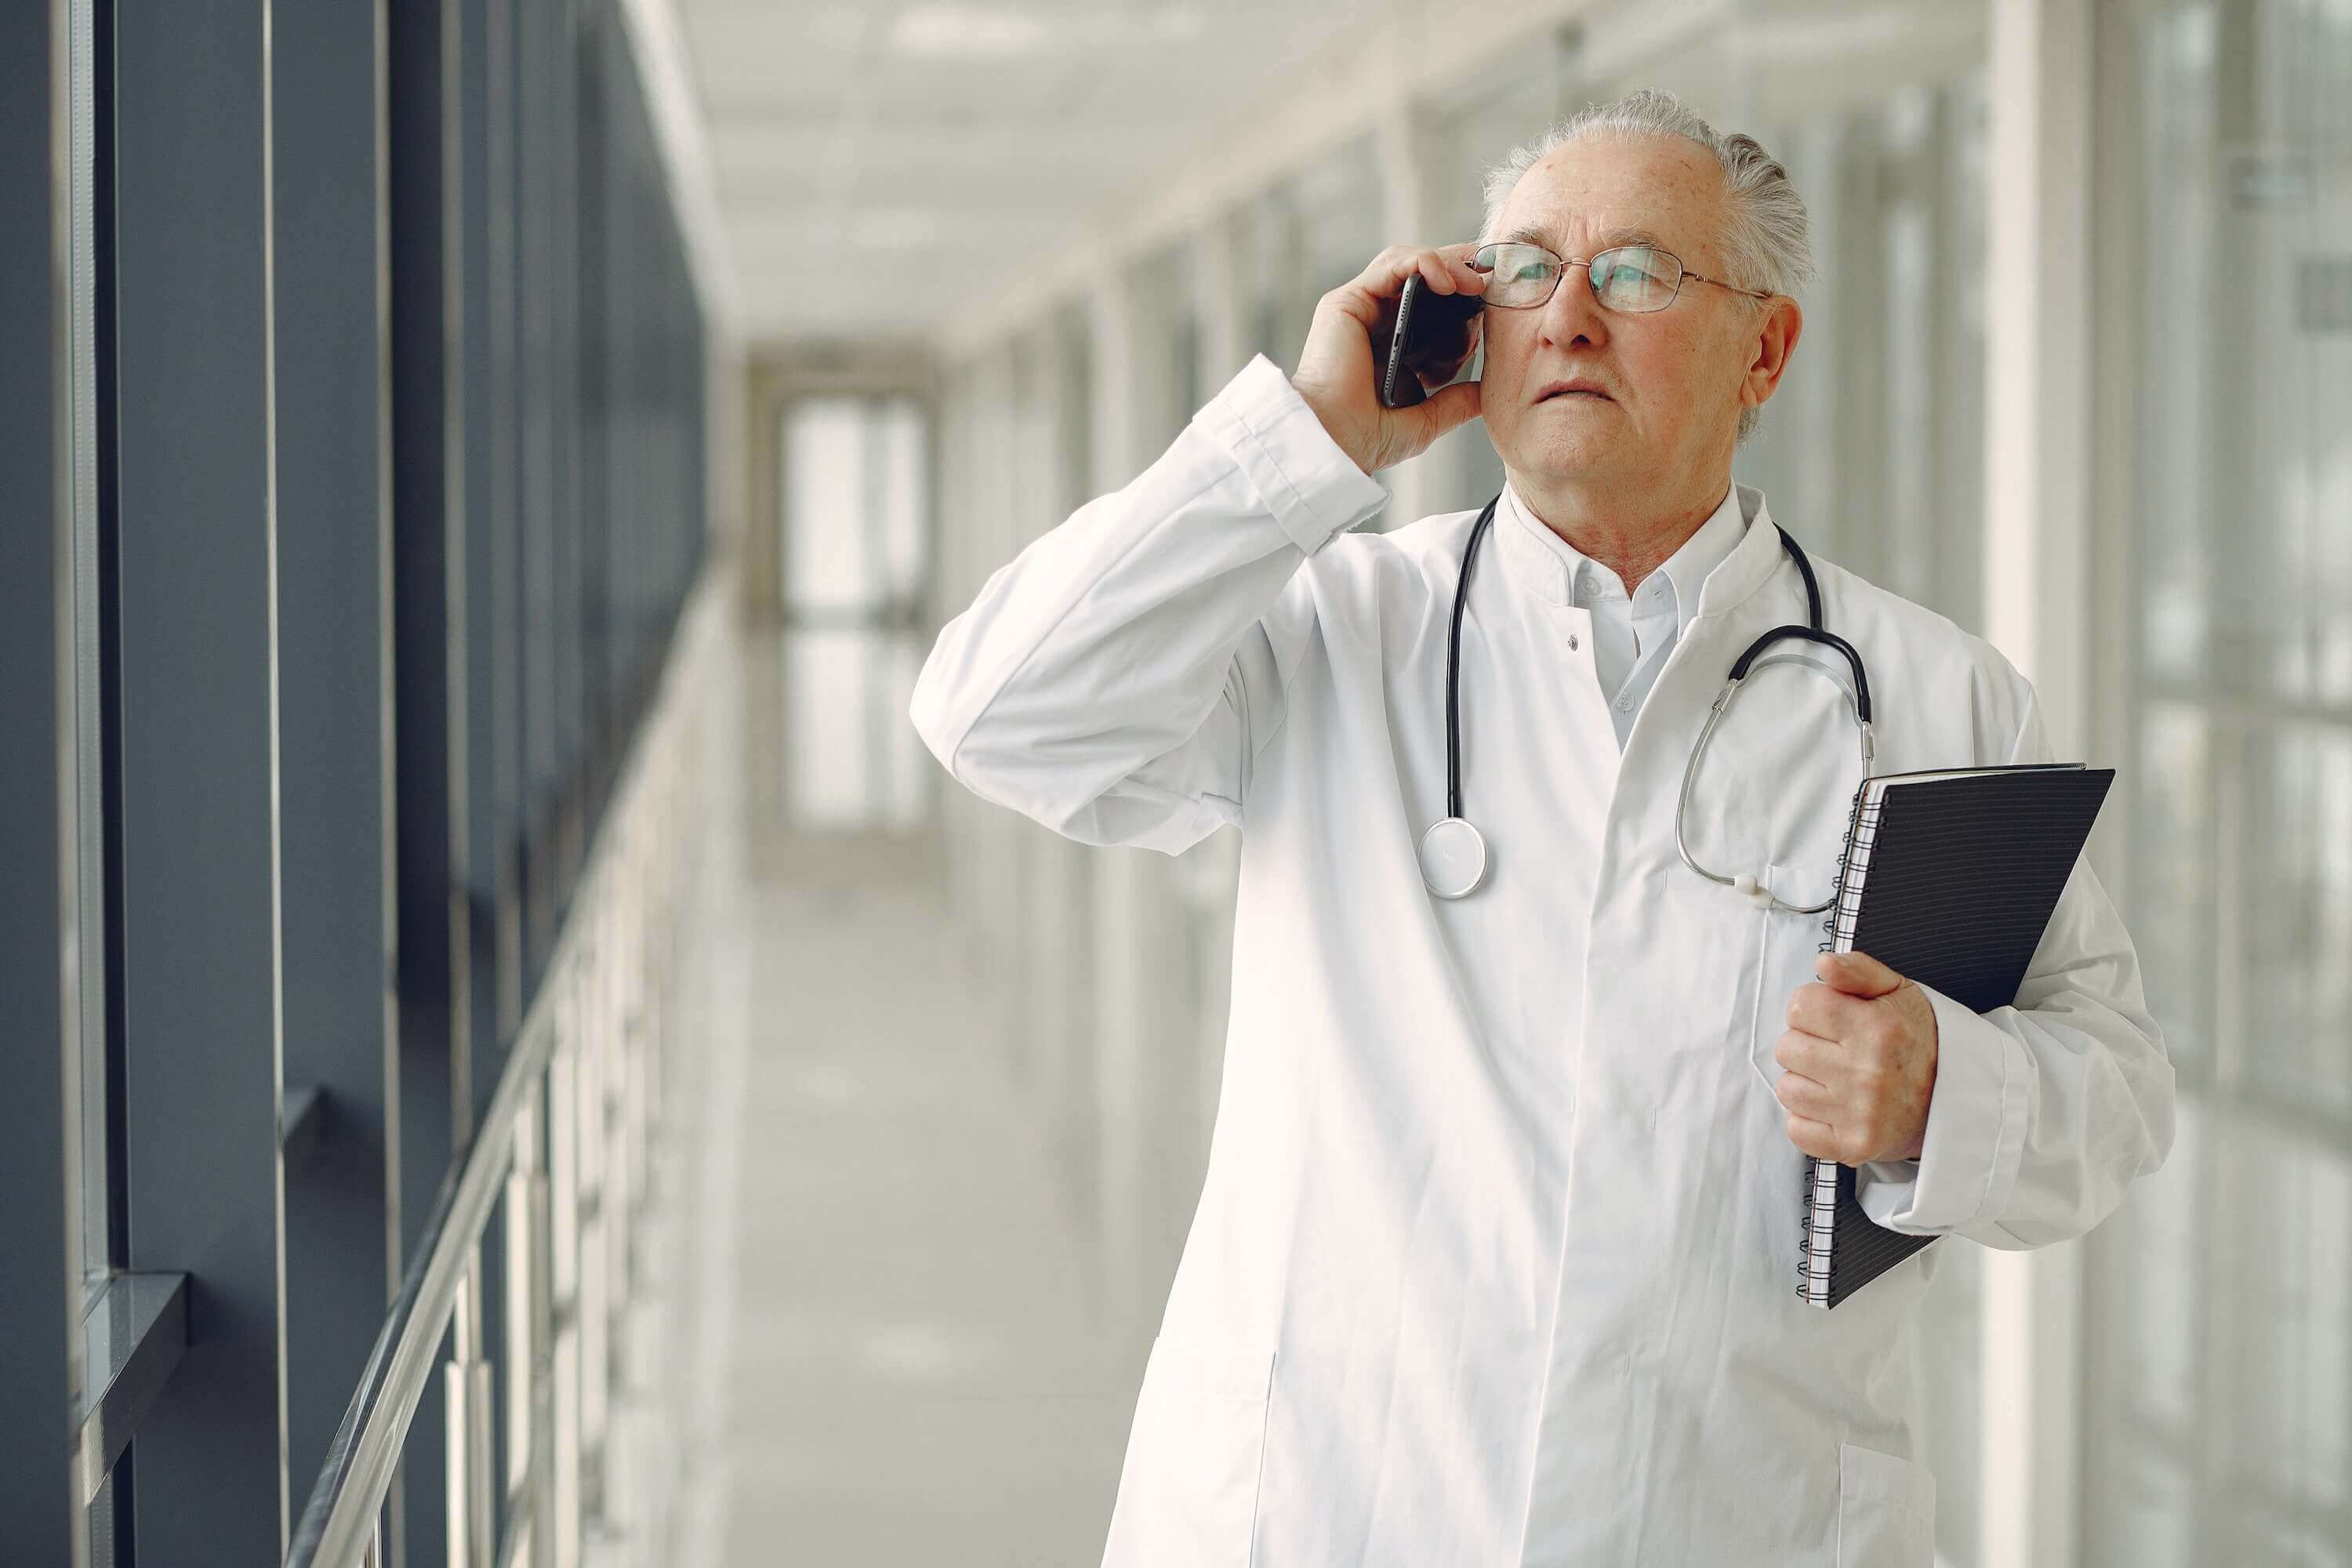  doctor in medical uniform talking on mobile phone in clinic